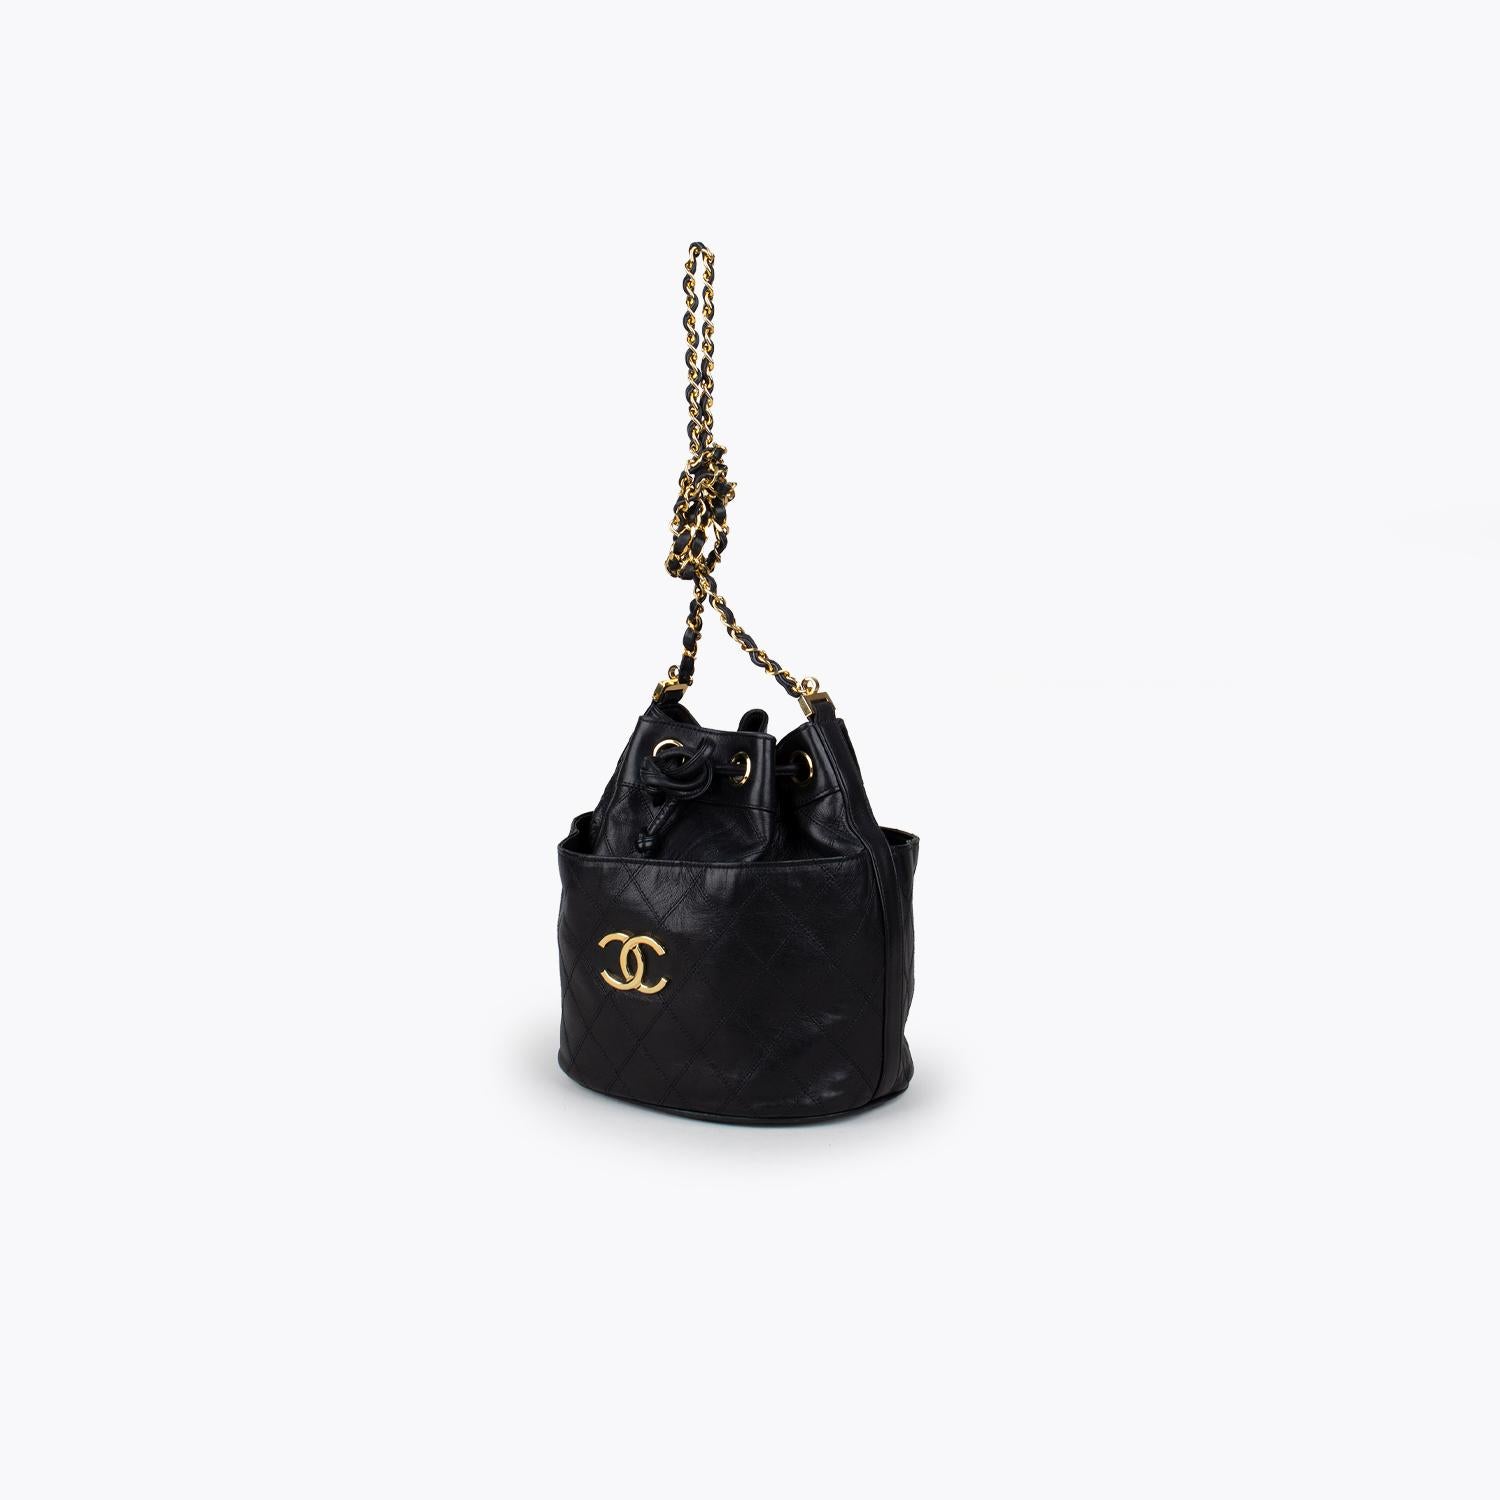 Black quilted lamb leather Chanel Chain bucket bag 

– Gold-tone hardware
– Single detachable chain-link shoulder strap
– Dual slit pockets at back and front
– Tonal leather lining and drawstring closure at top

Overall Preloved Condition: Very